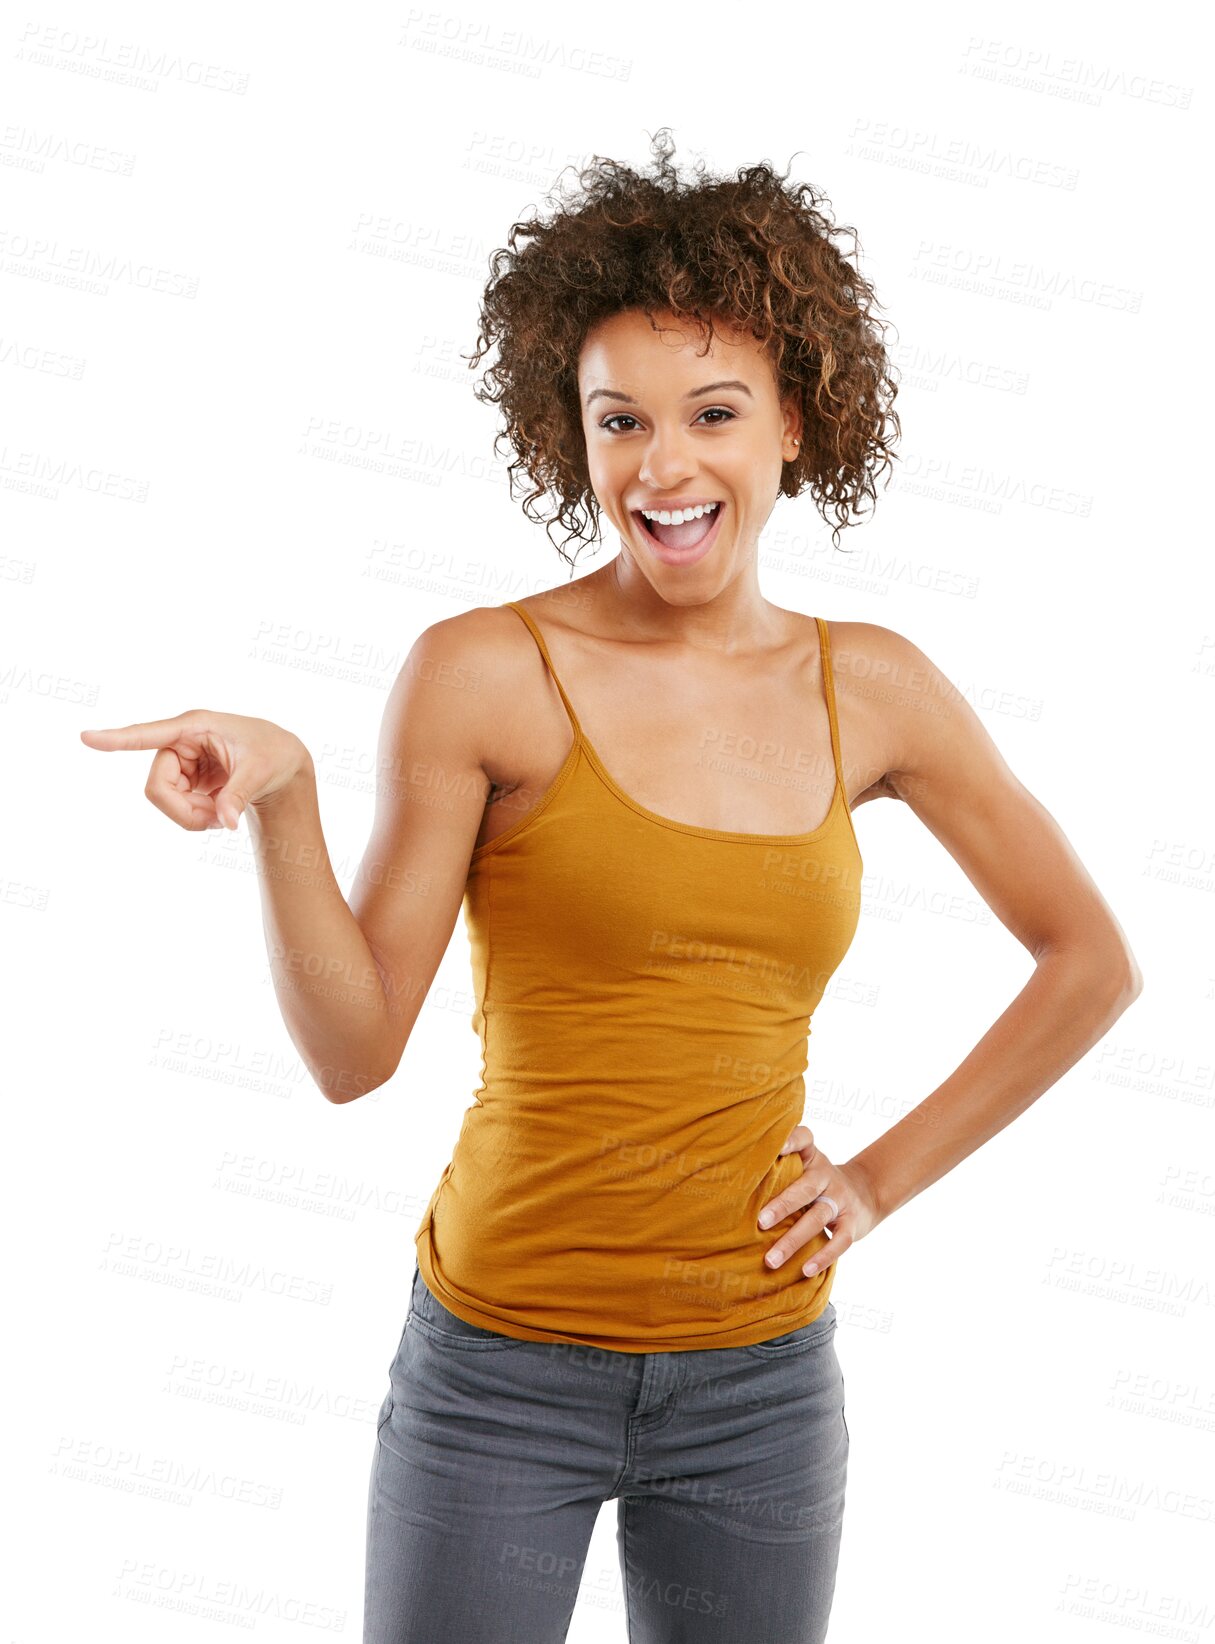 Buy stock photo Happy woman, portrait smile and pointing standing isolated on a transparent PNG background. Female person or model smiling in casual clothing and point finger for advertising, choice or surprise